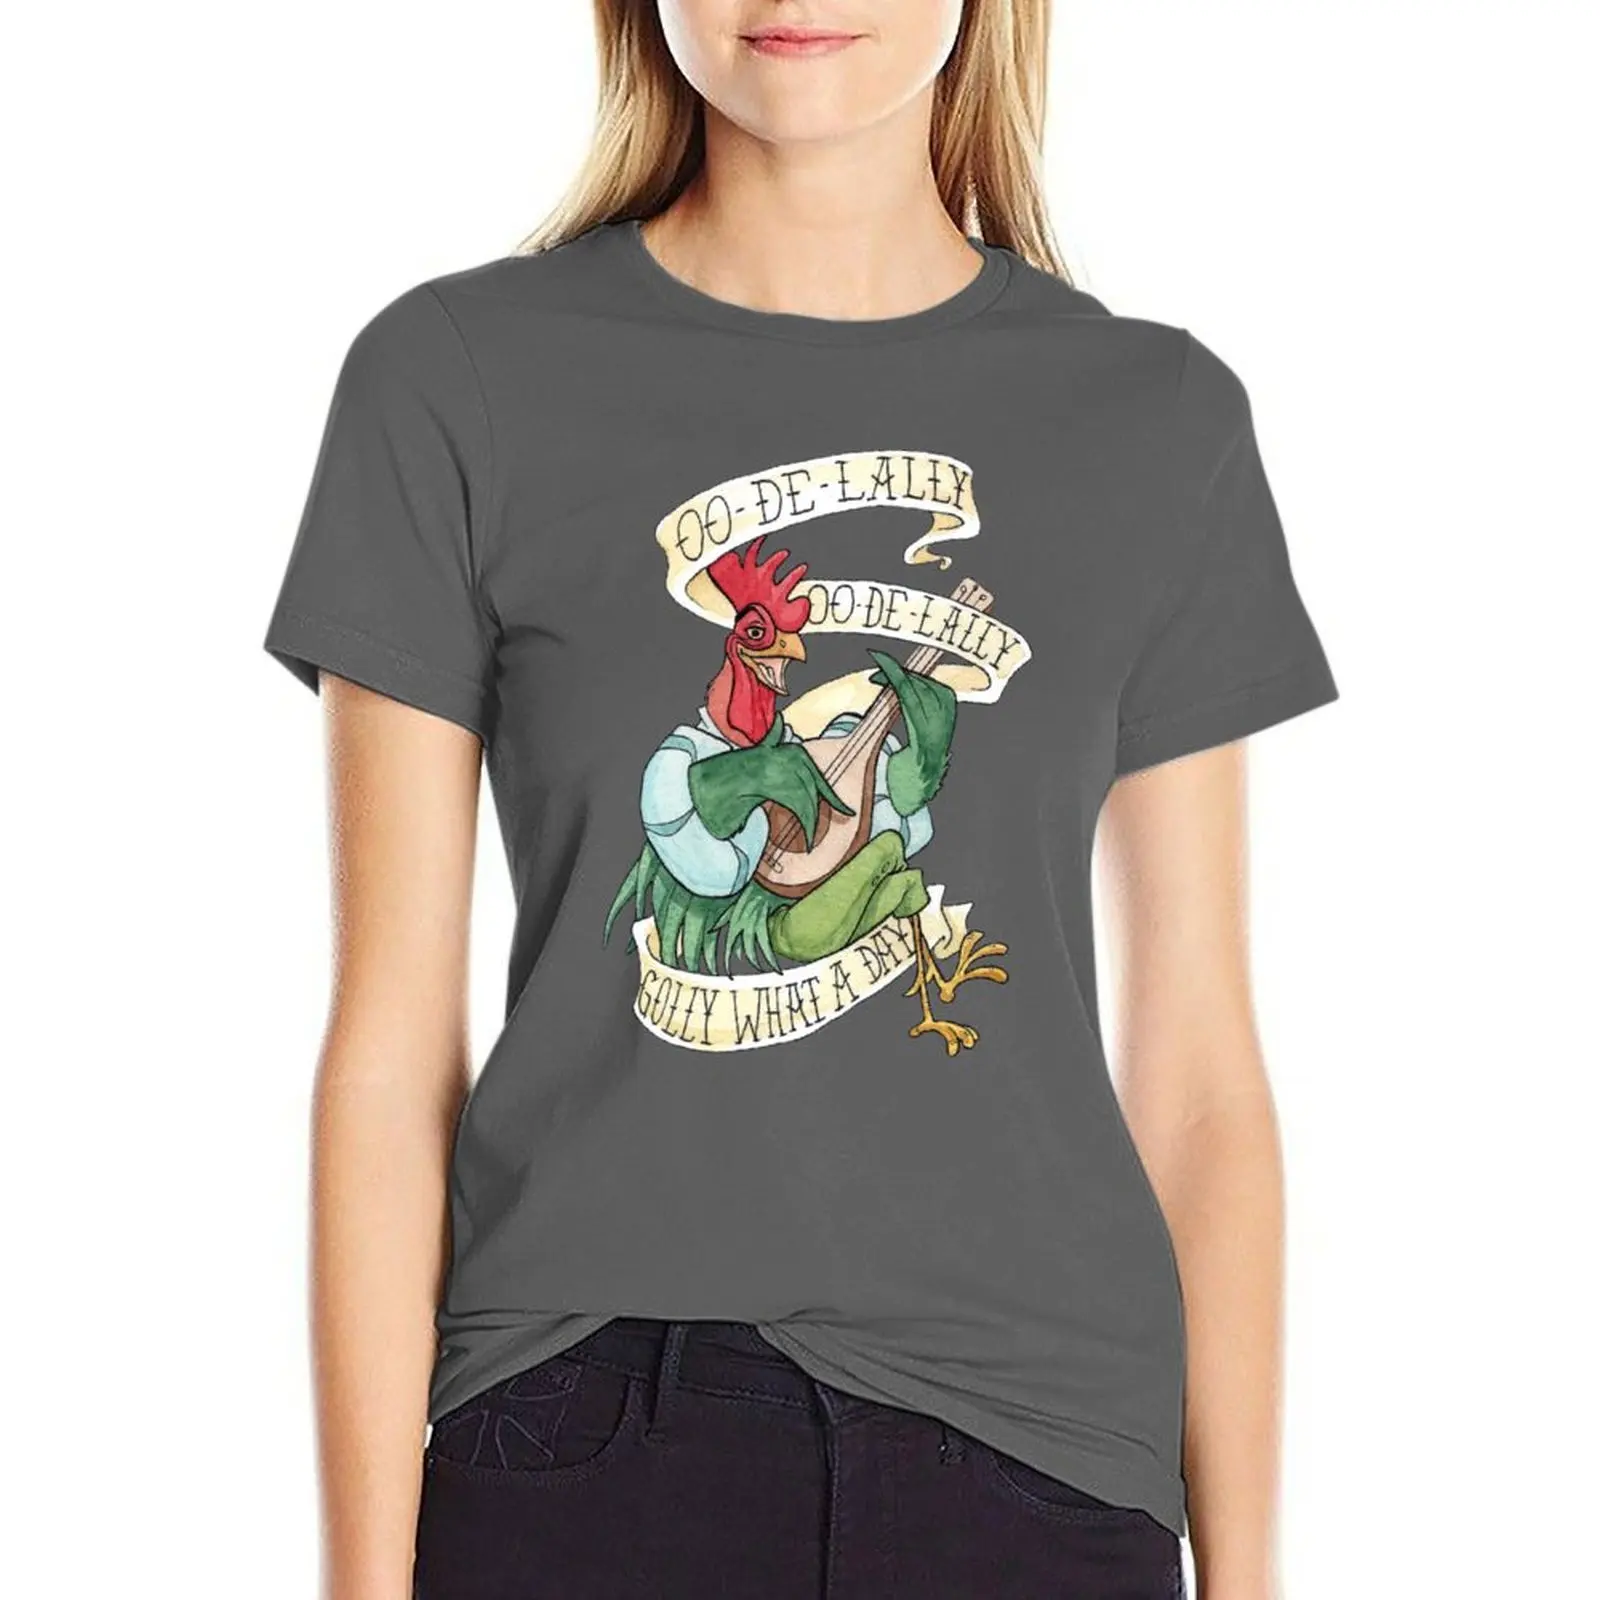 

Alan-A-Dale Rooster : OO-De-Lally Golly What A Day Tattoo Watercolor Painting Robin Hood T-Shirt summer clothes for Women